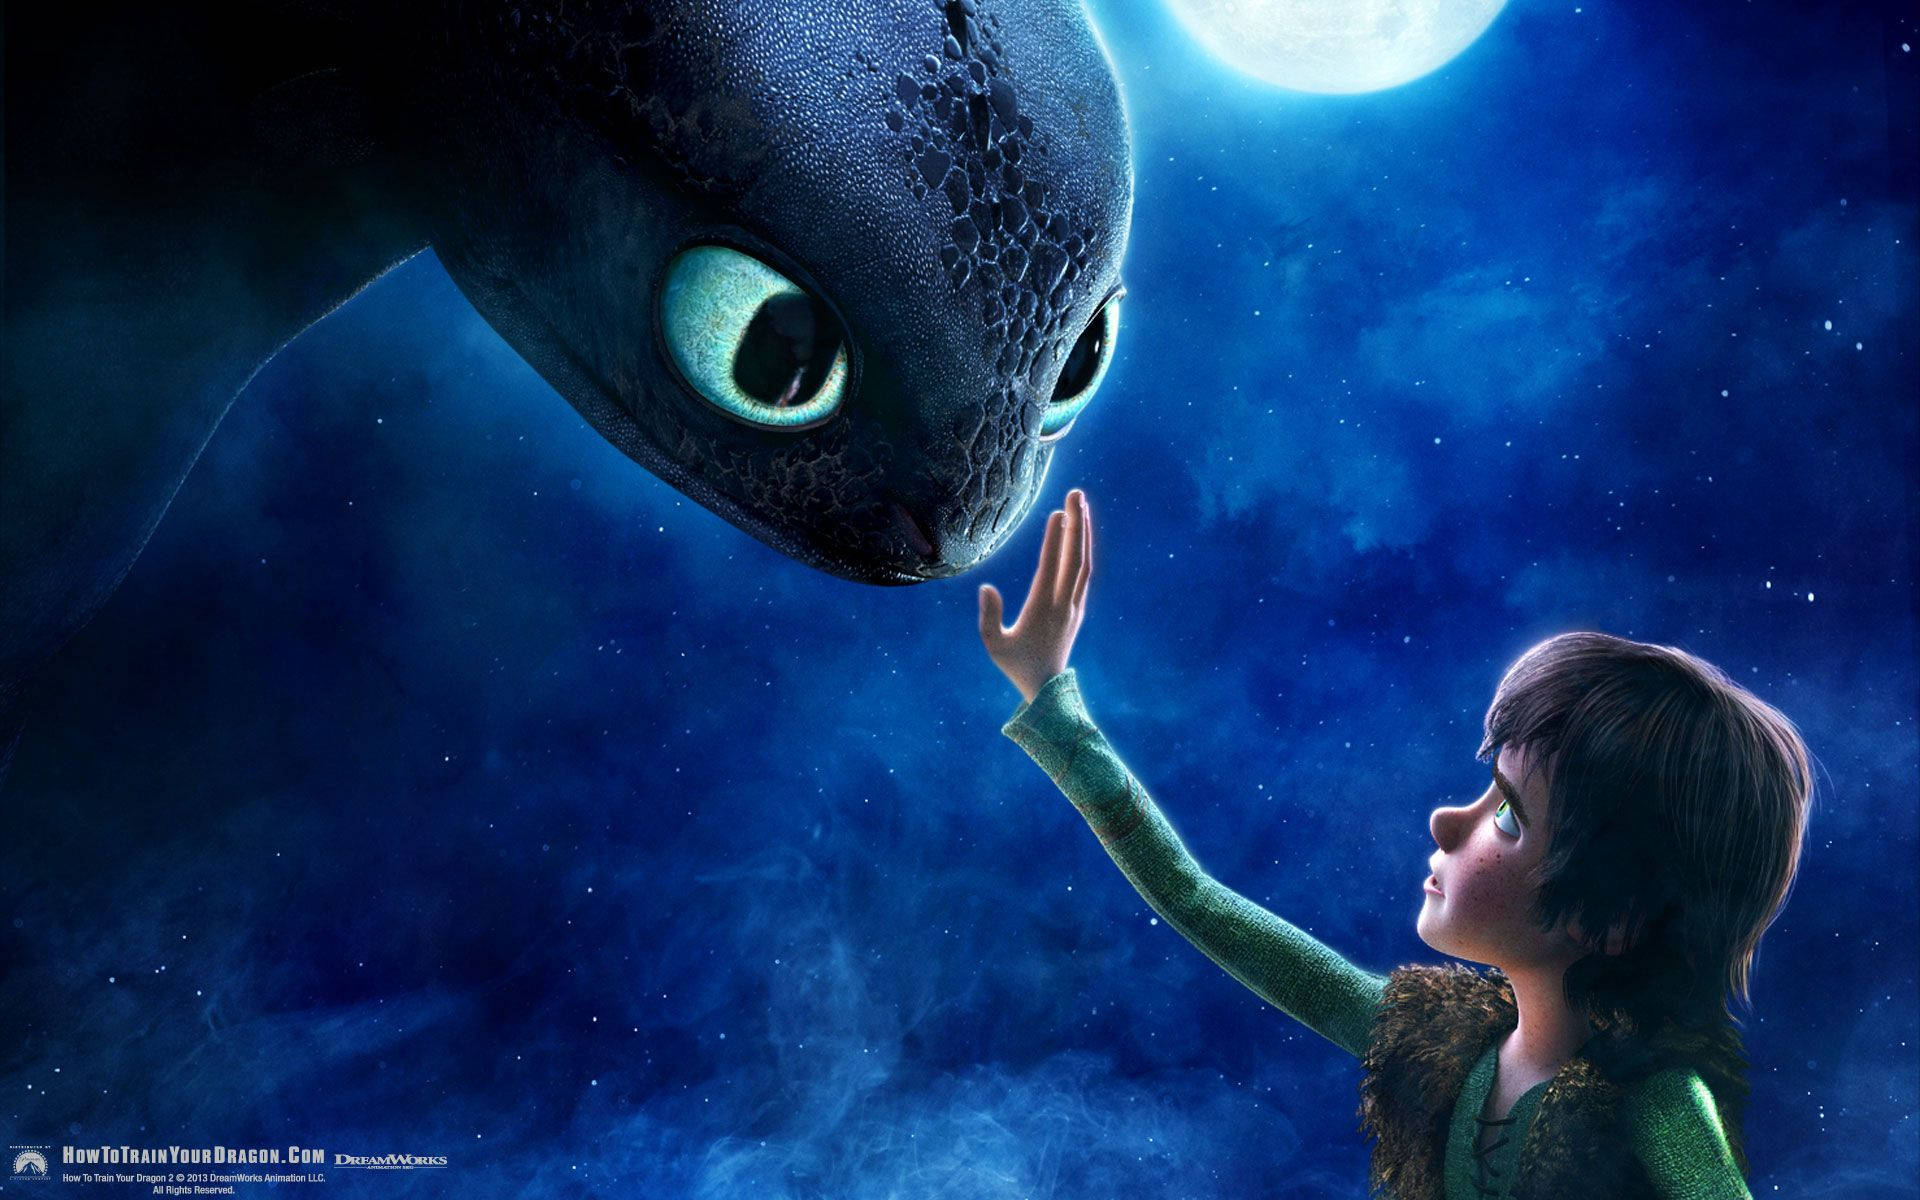 How To Train Your Dragon Toothless And Hiccup Background